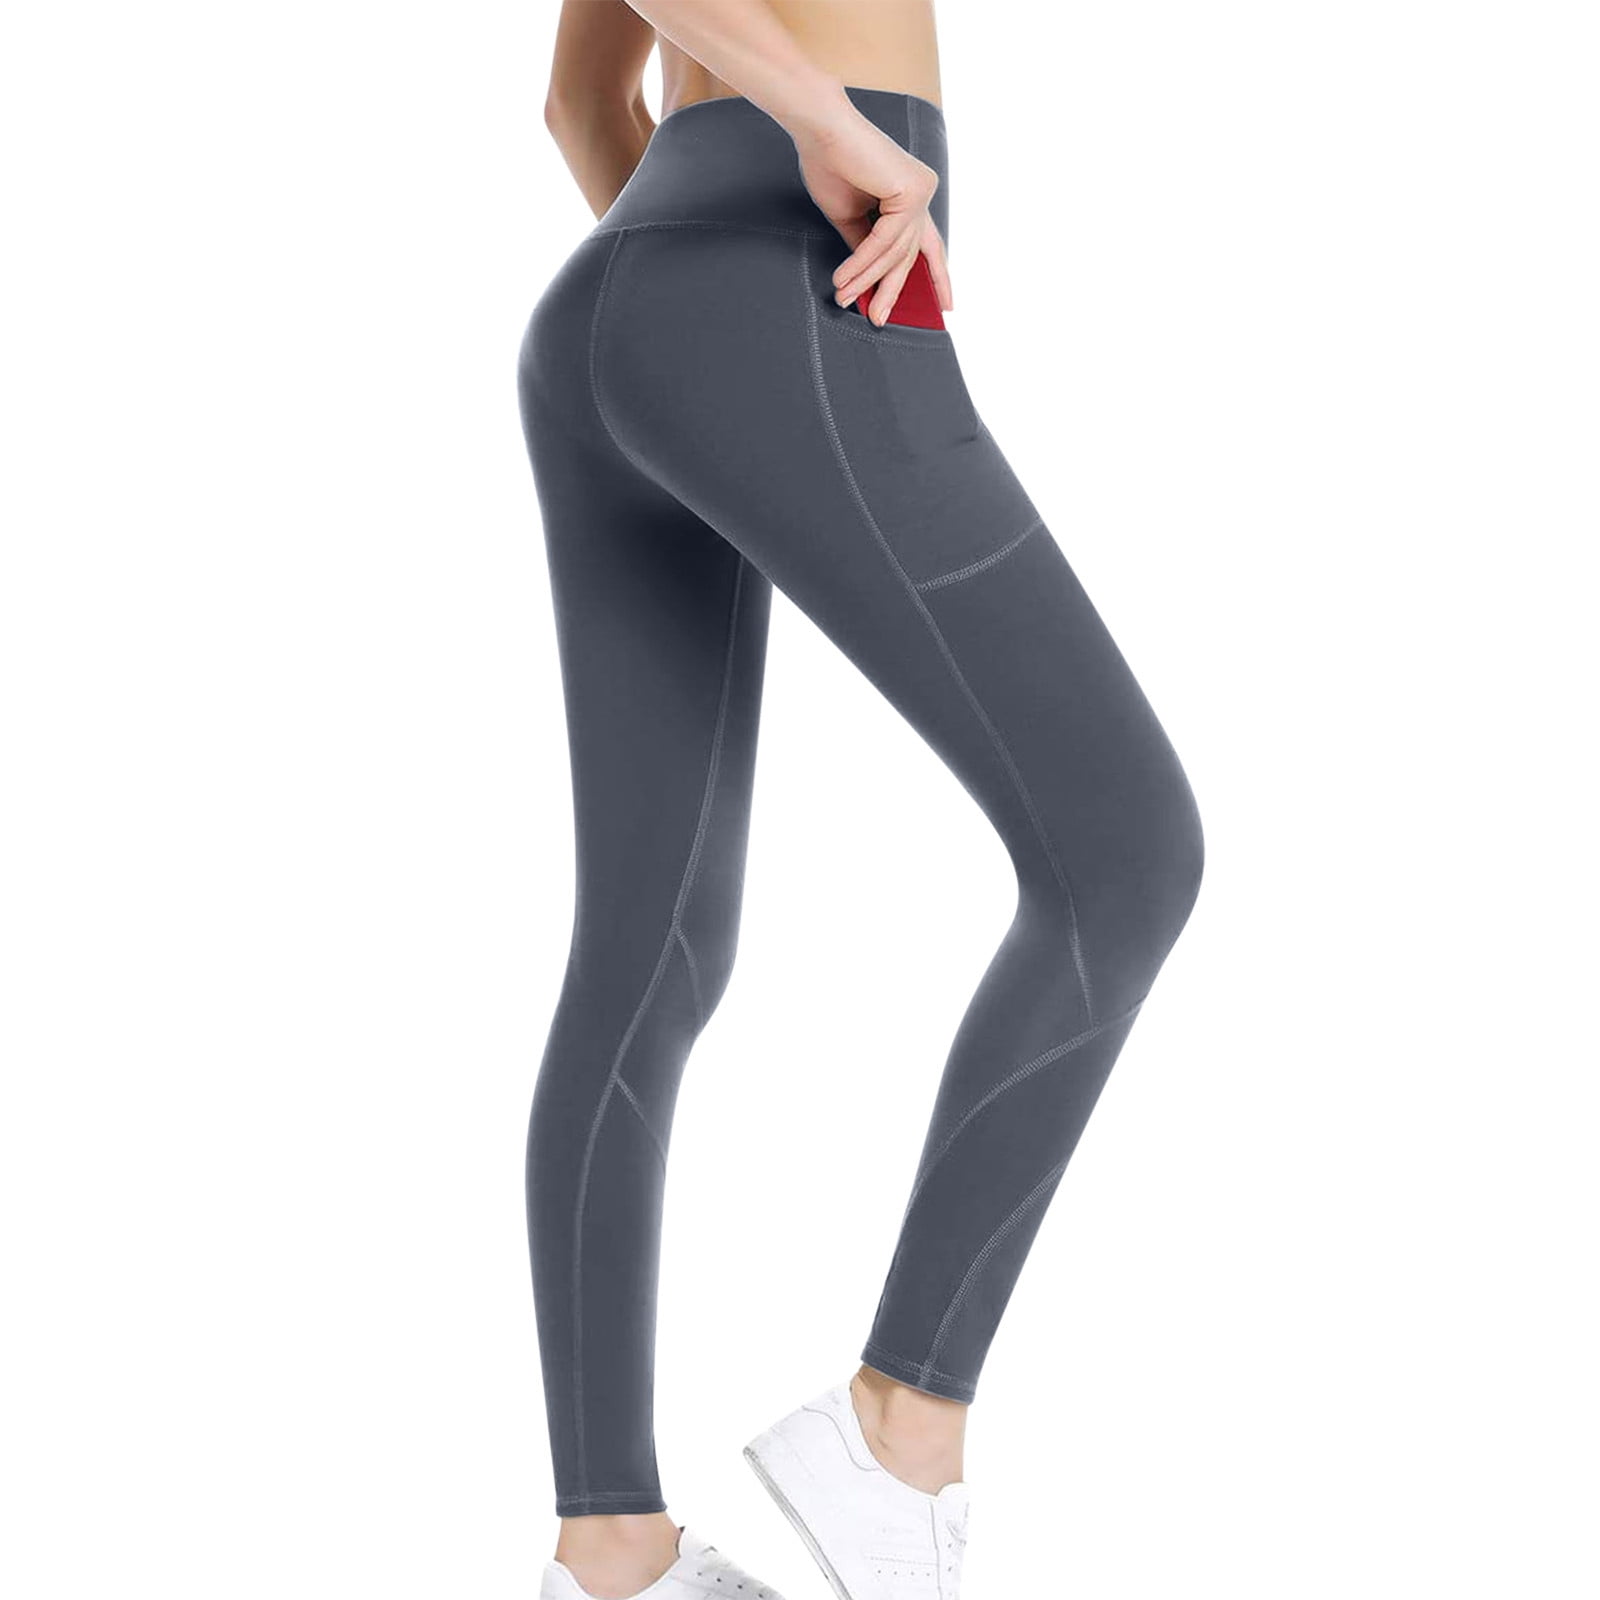 Buttery Soft Capri Yoga Pants Tummy Control Athletic Gym Tights Sunzel High Waisted Workout Leggings with Pockets for Women 